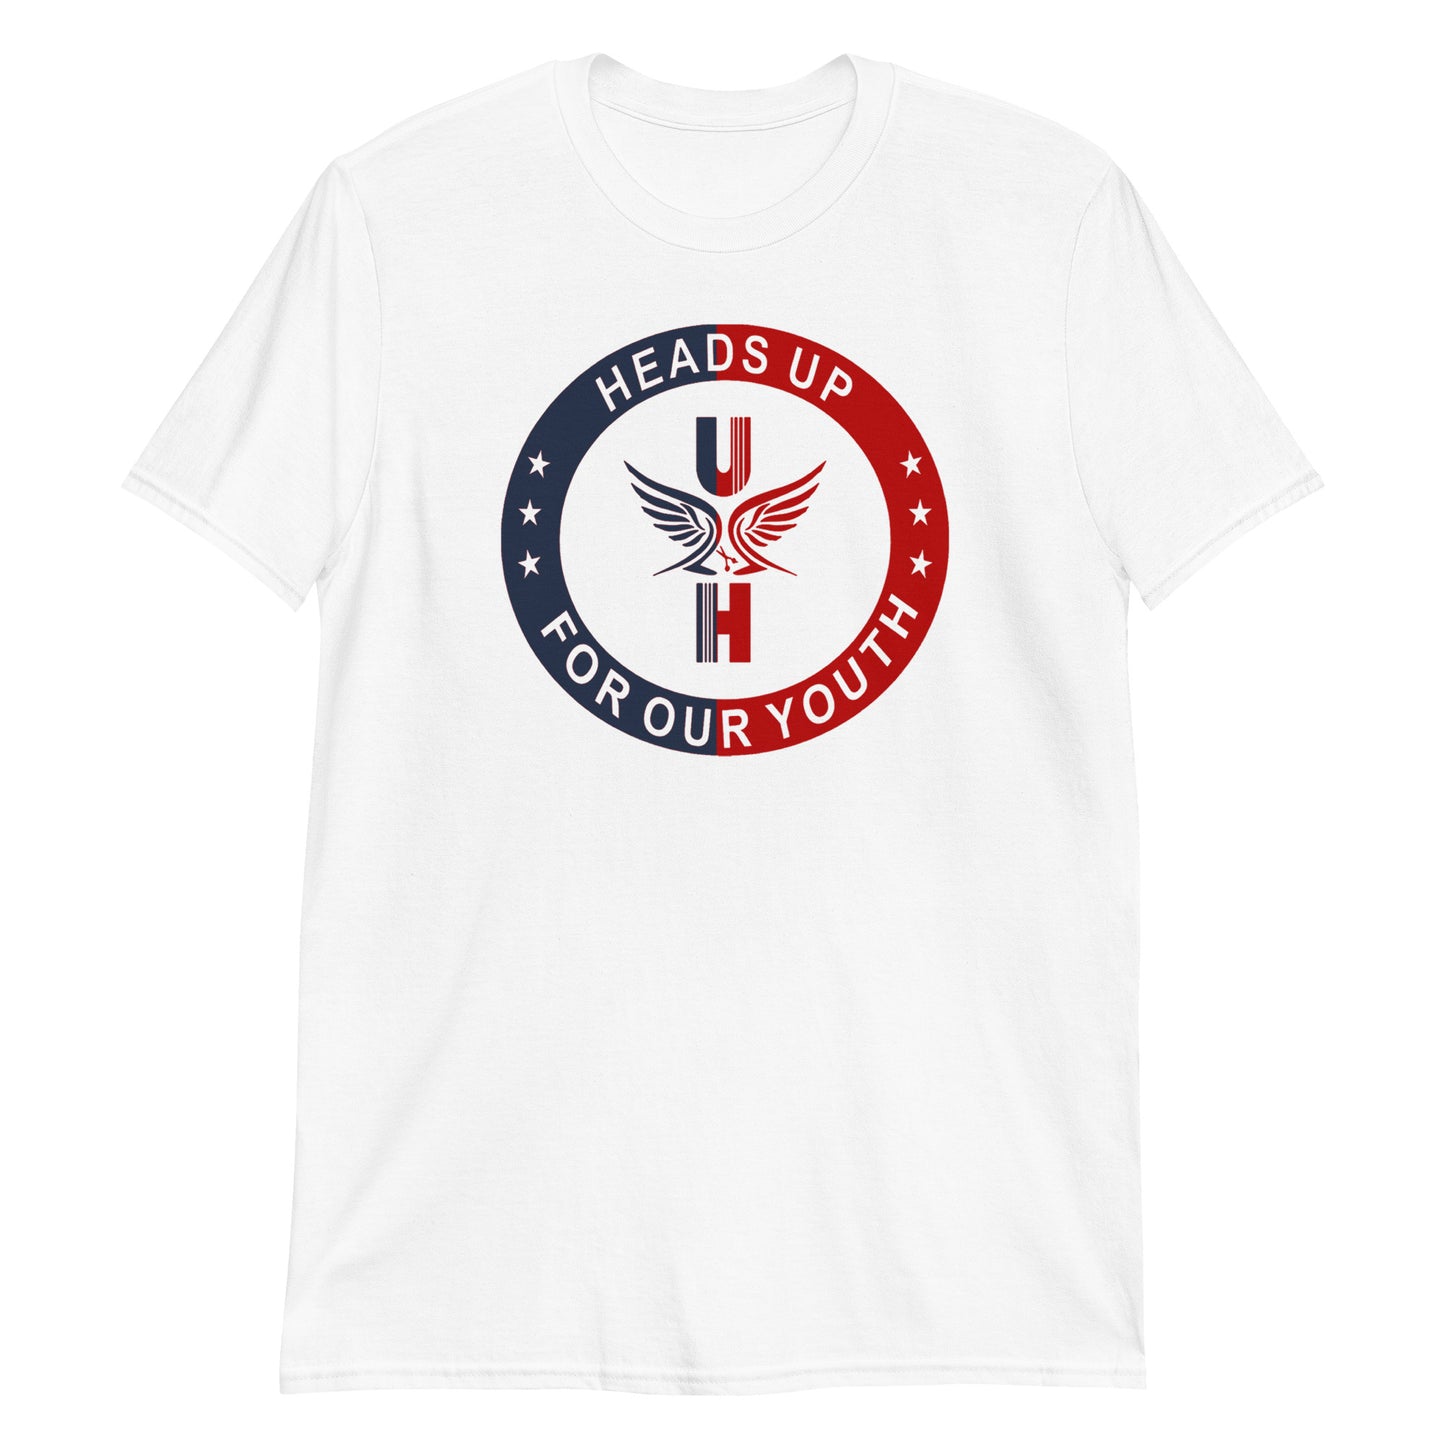 Heads Up For Our Youth Short-Sleeve Unisex T-Shirt